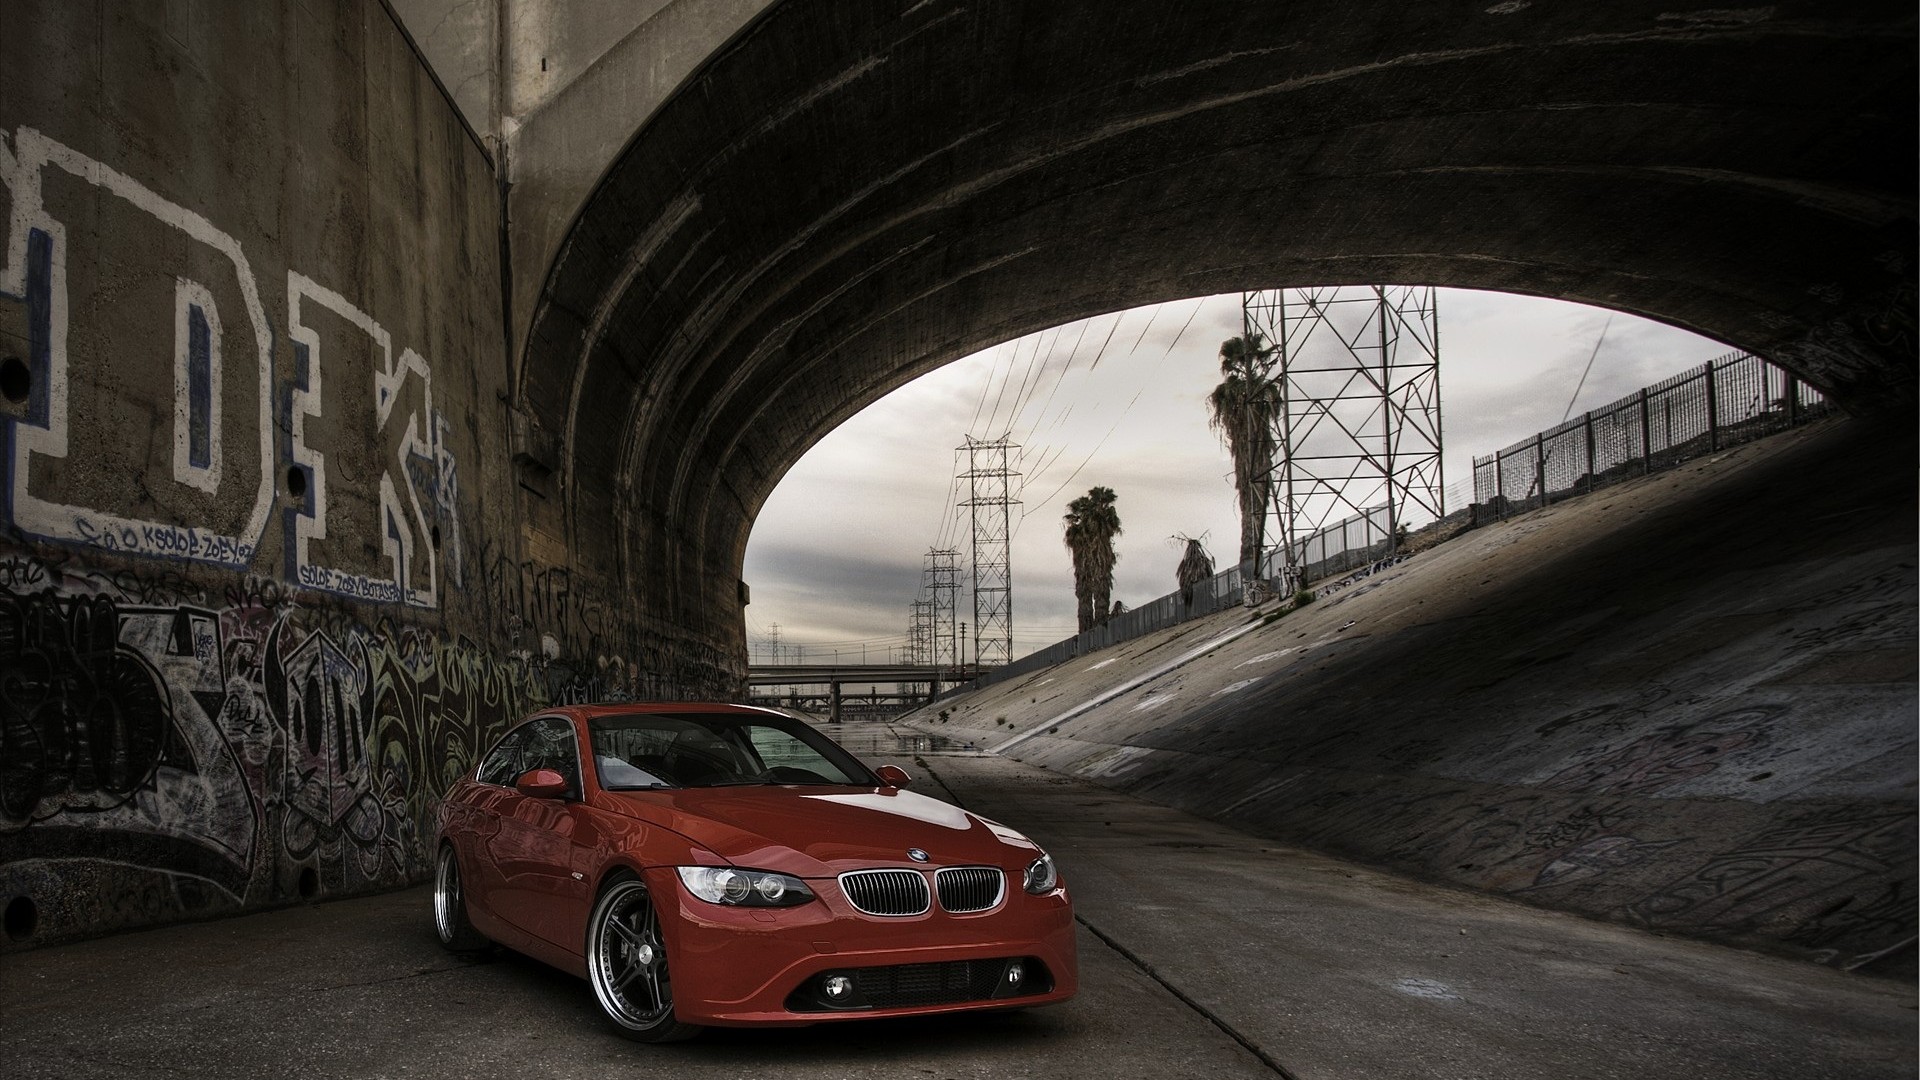 BMW-Picture-1920x1080